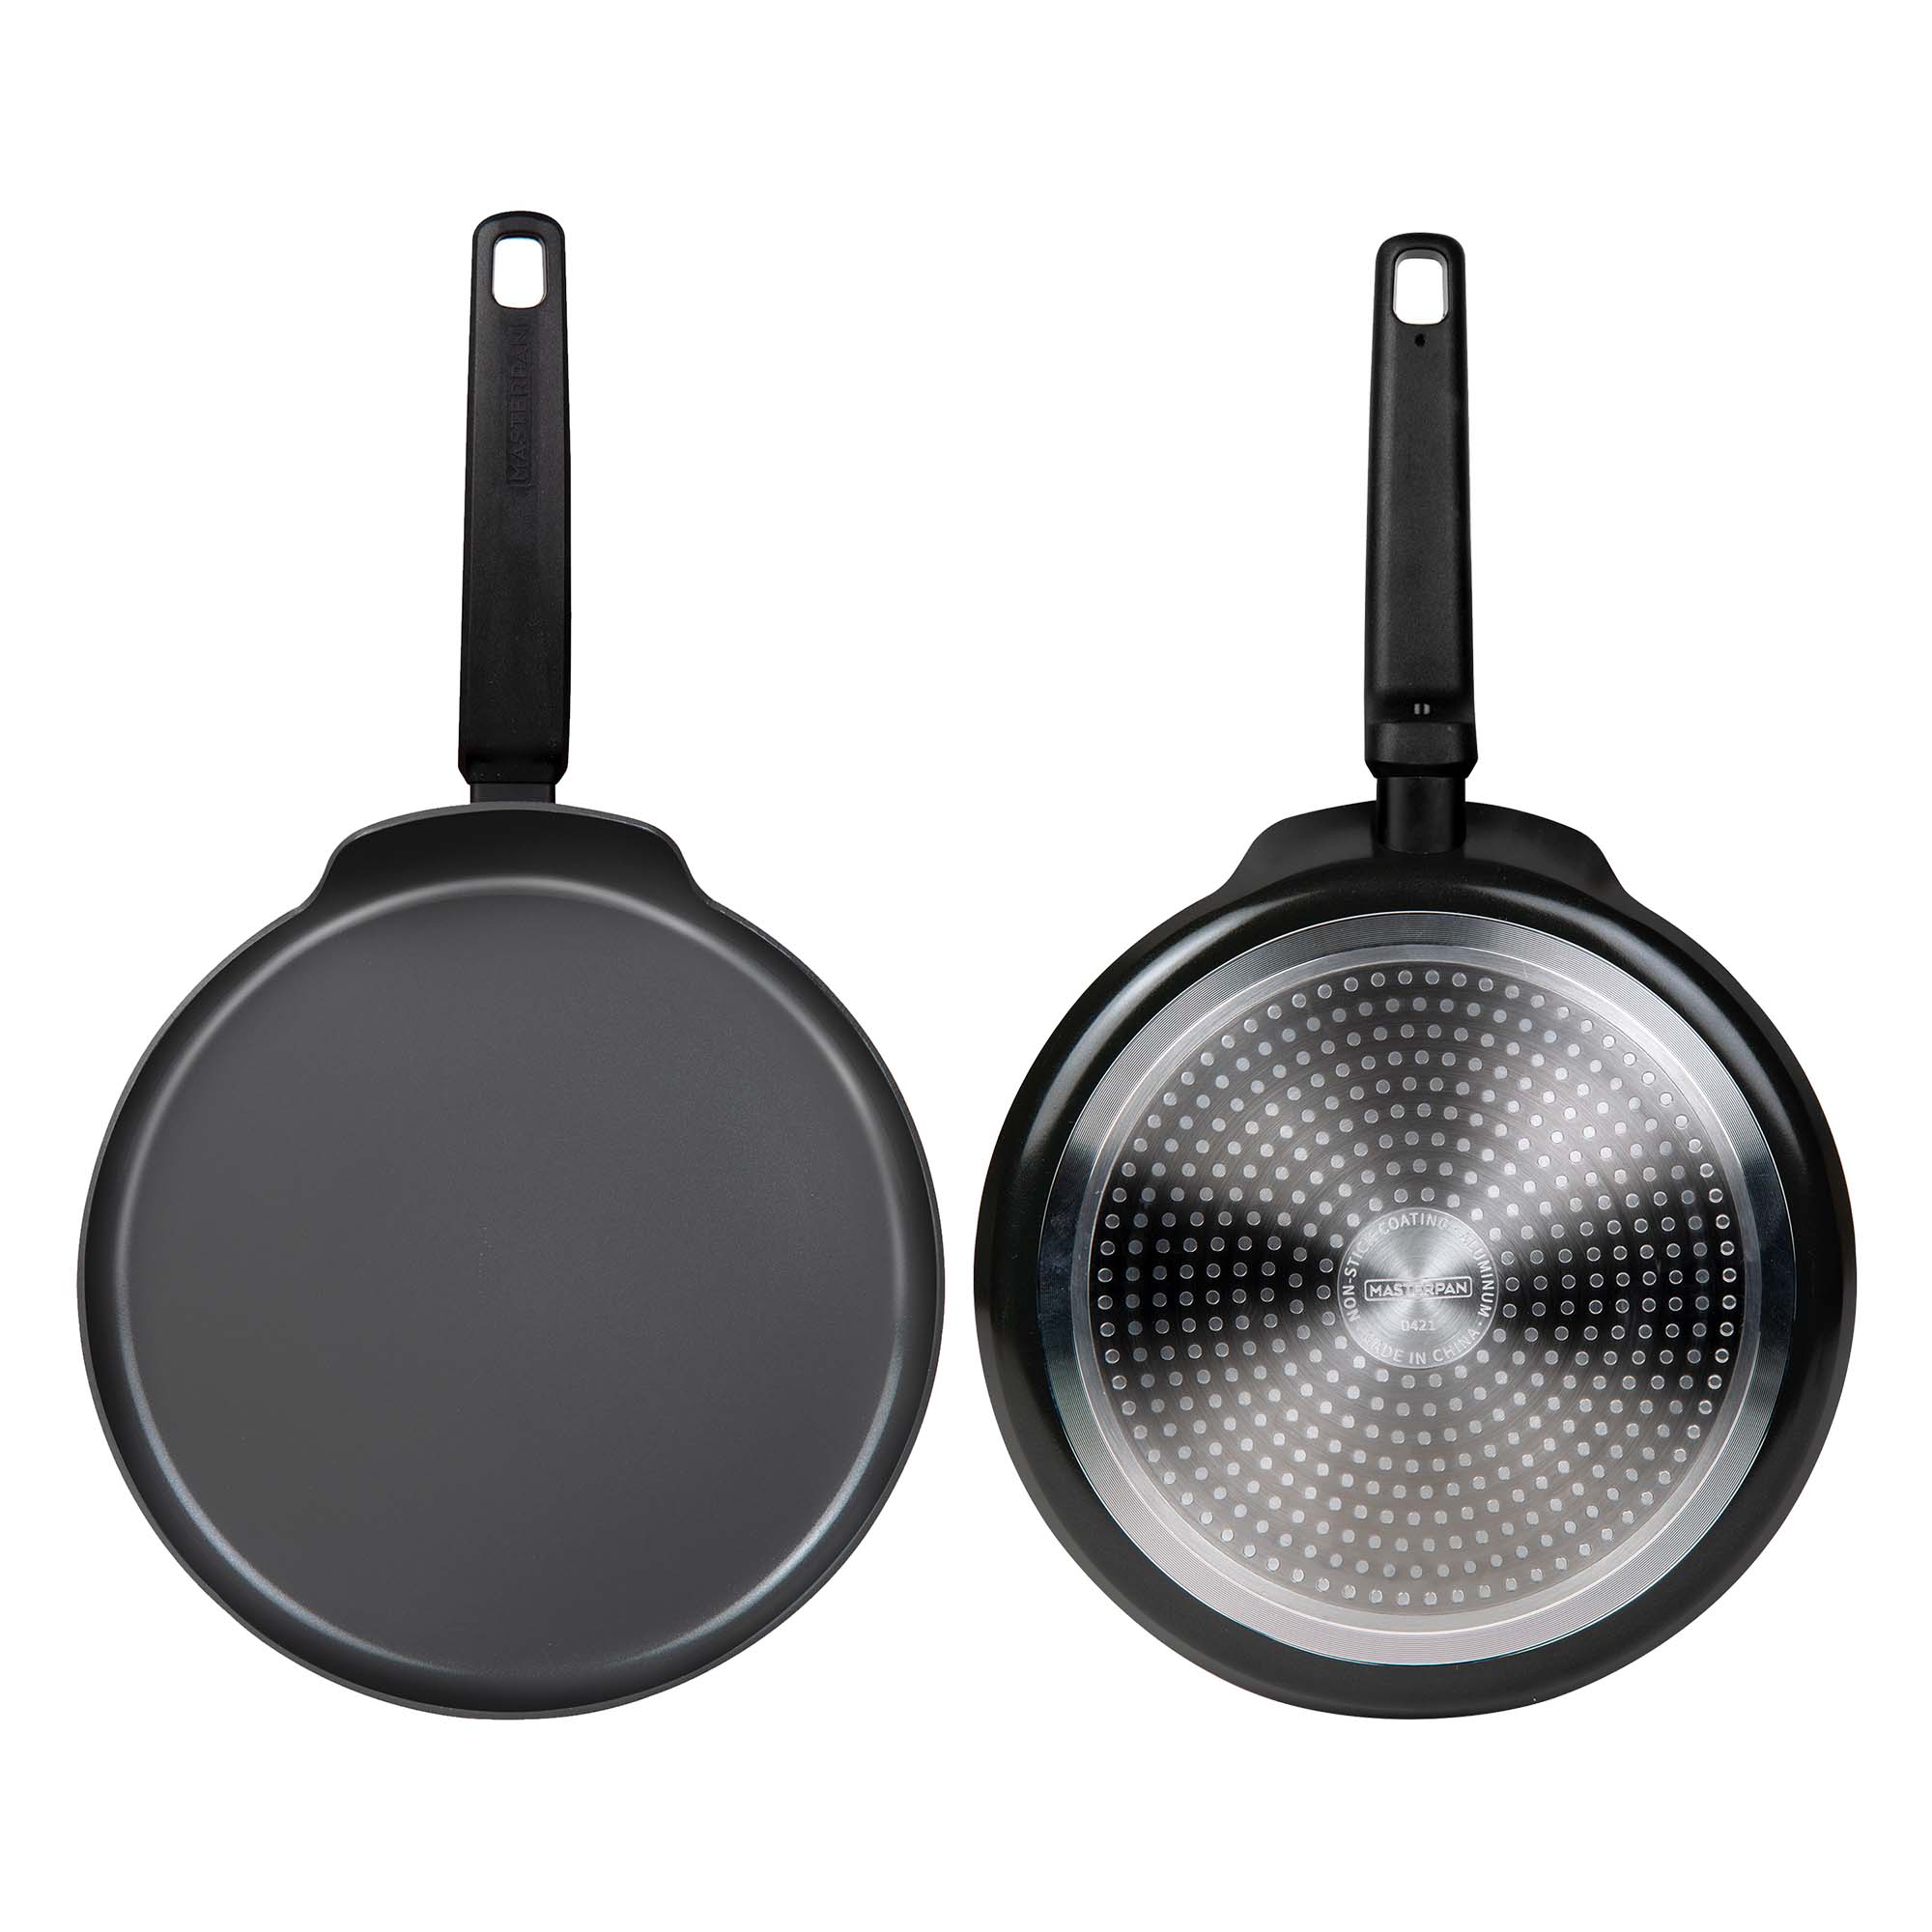  Ceramic Coated Nonstick Frying Pans, 3-Pack Bundle Set: 9.5,  11, and 13 Inch, Durable, High Heat Aluminum Base with No PTFE, PFOA, Lead  or Cadmium, Oven & Dishwasher Safe